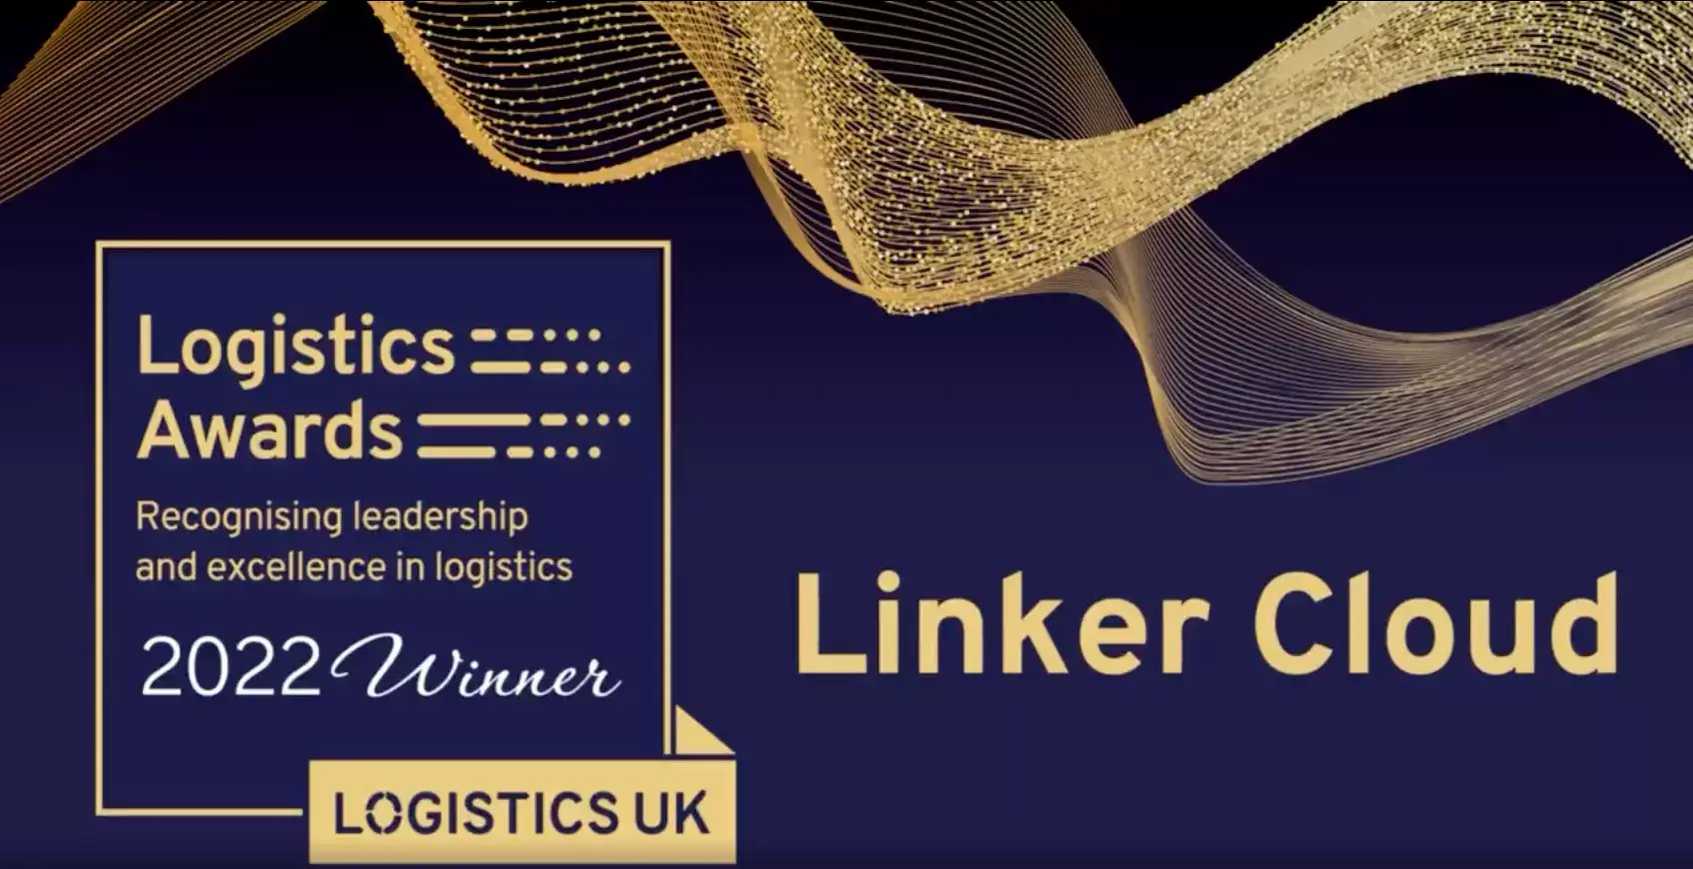 International Business of the Year by UK Logistics